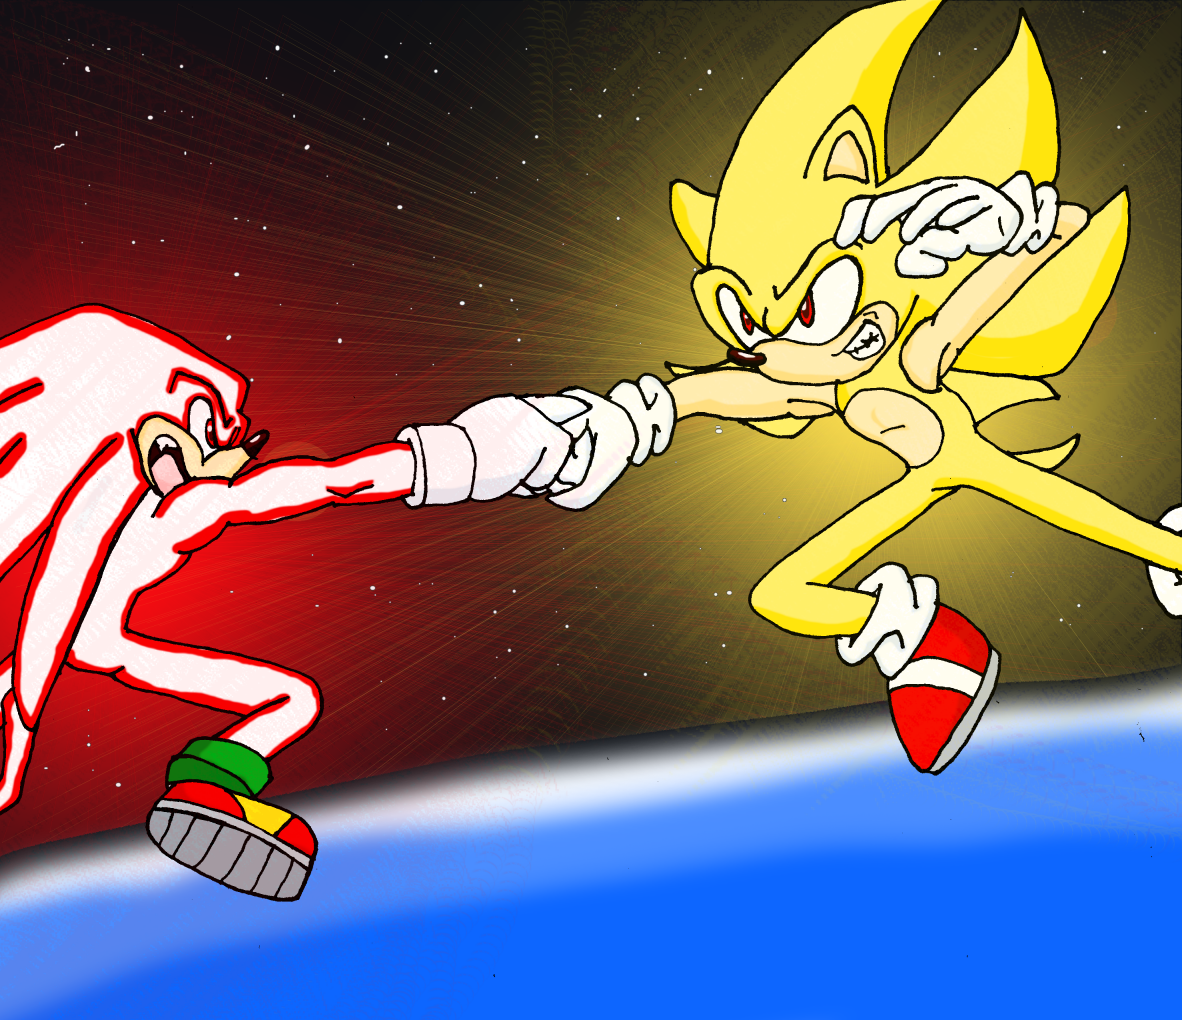 sonic and shadow and silver and knuckles super